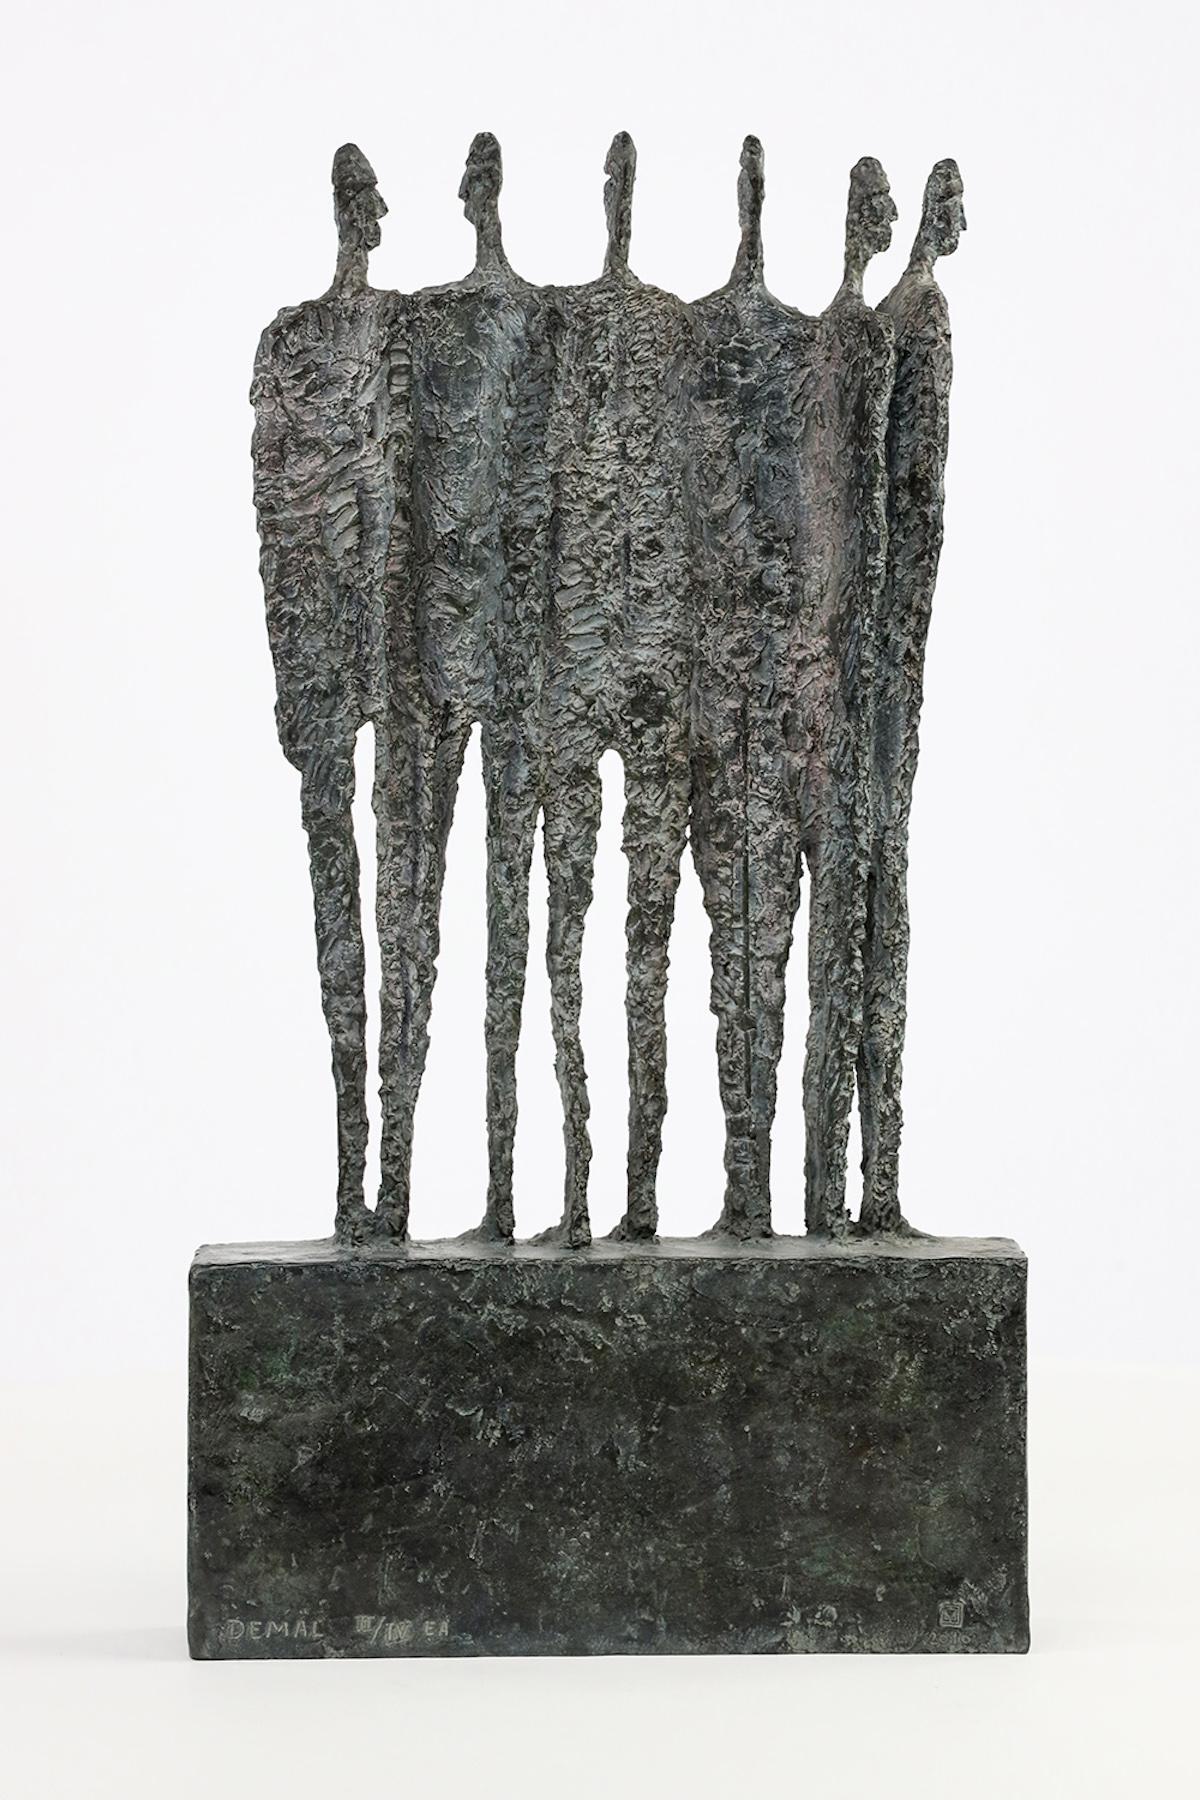 The Group by Martine Demal - Bronze sculpture, group of human figures, harmony For Sale 3